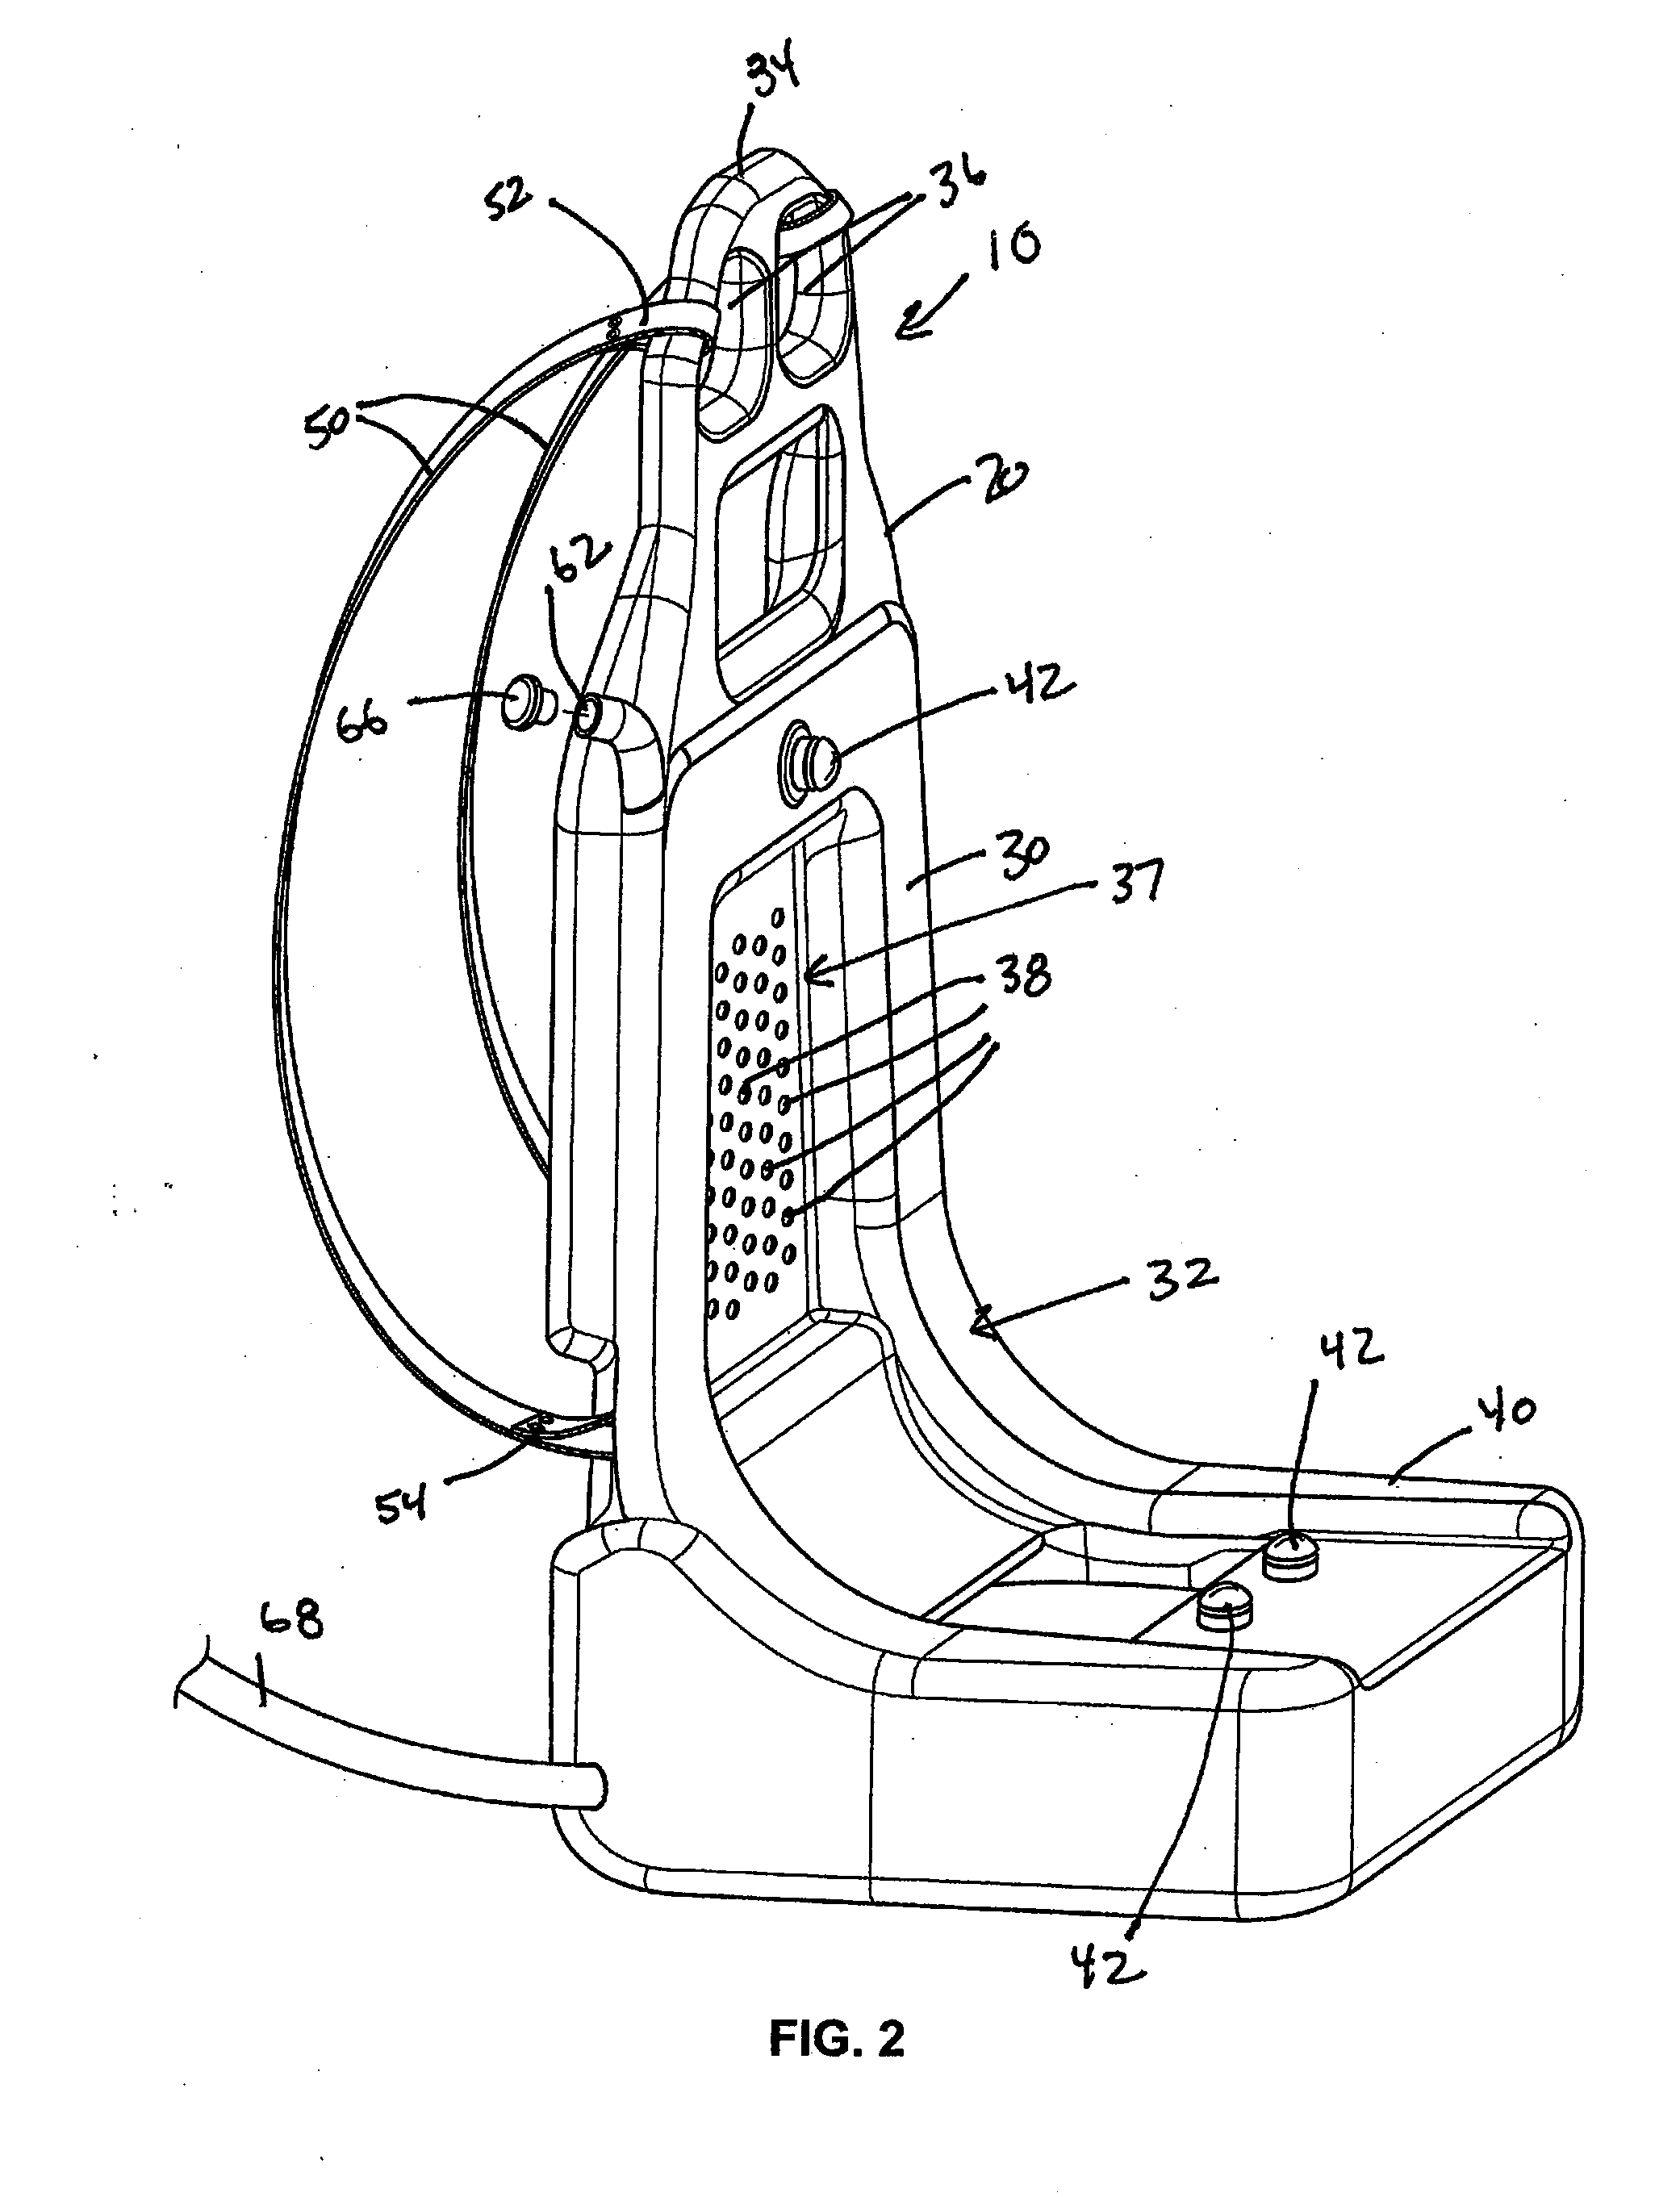 Apparatus and method for distributing a fluid